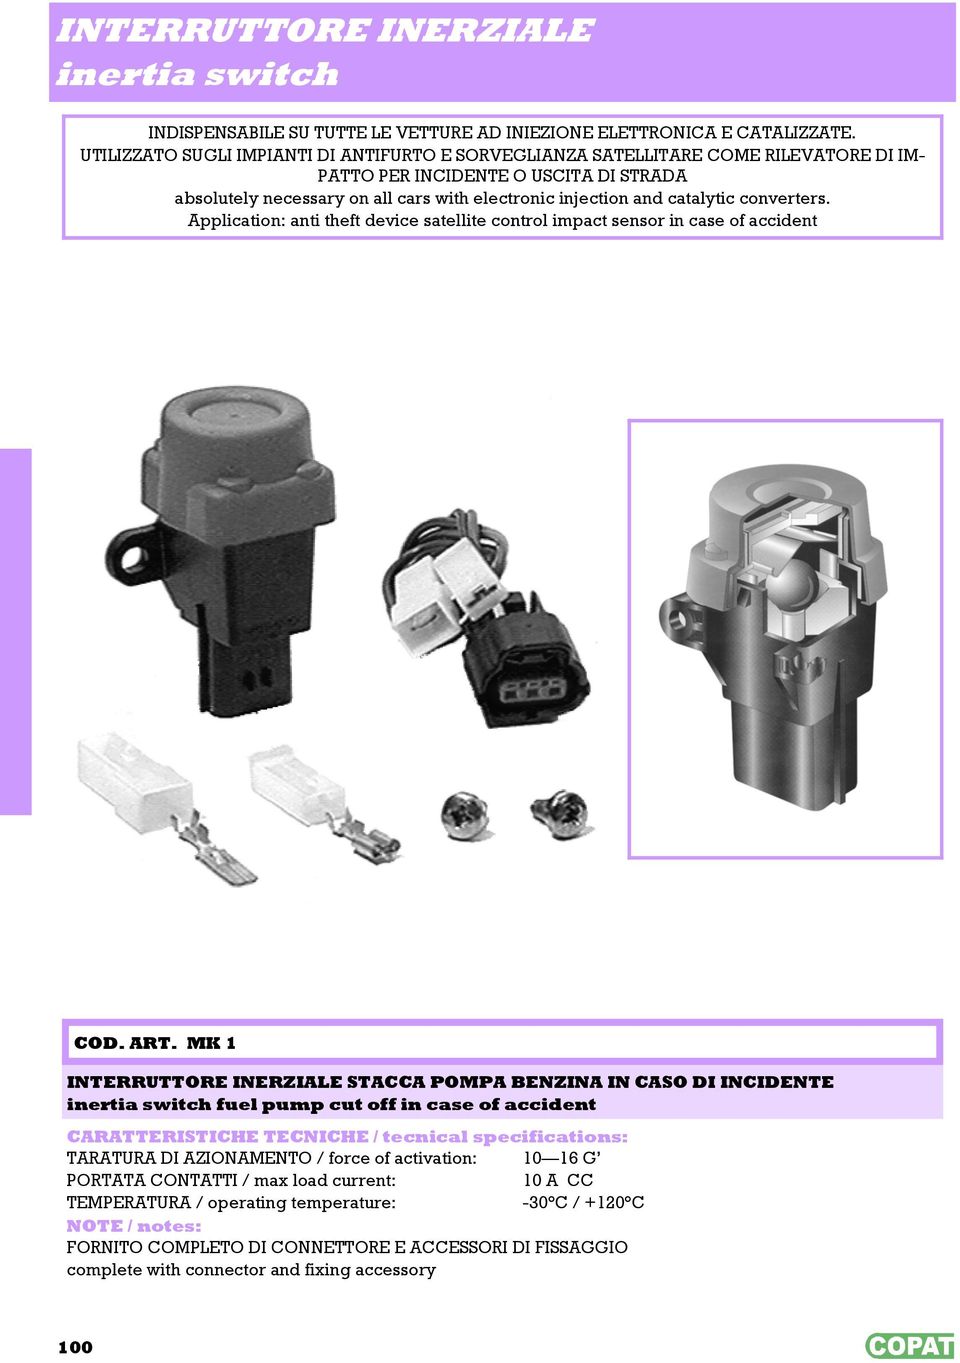 catalytic converters. Application: anti theft device satellite control impact sensor in case of accident COD. ART.